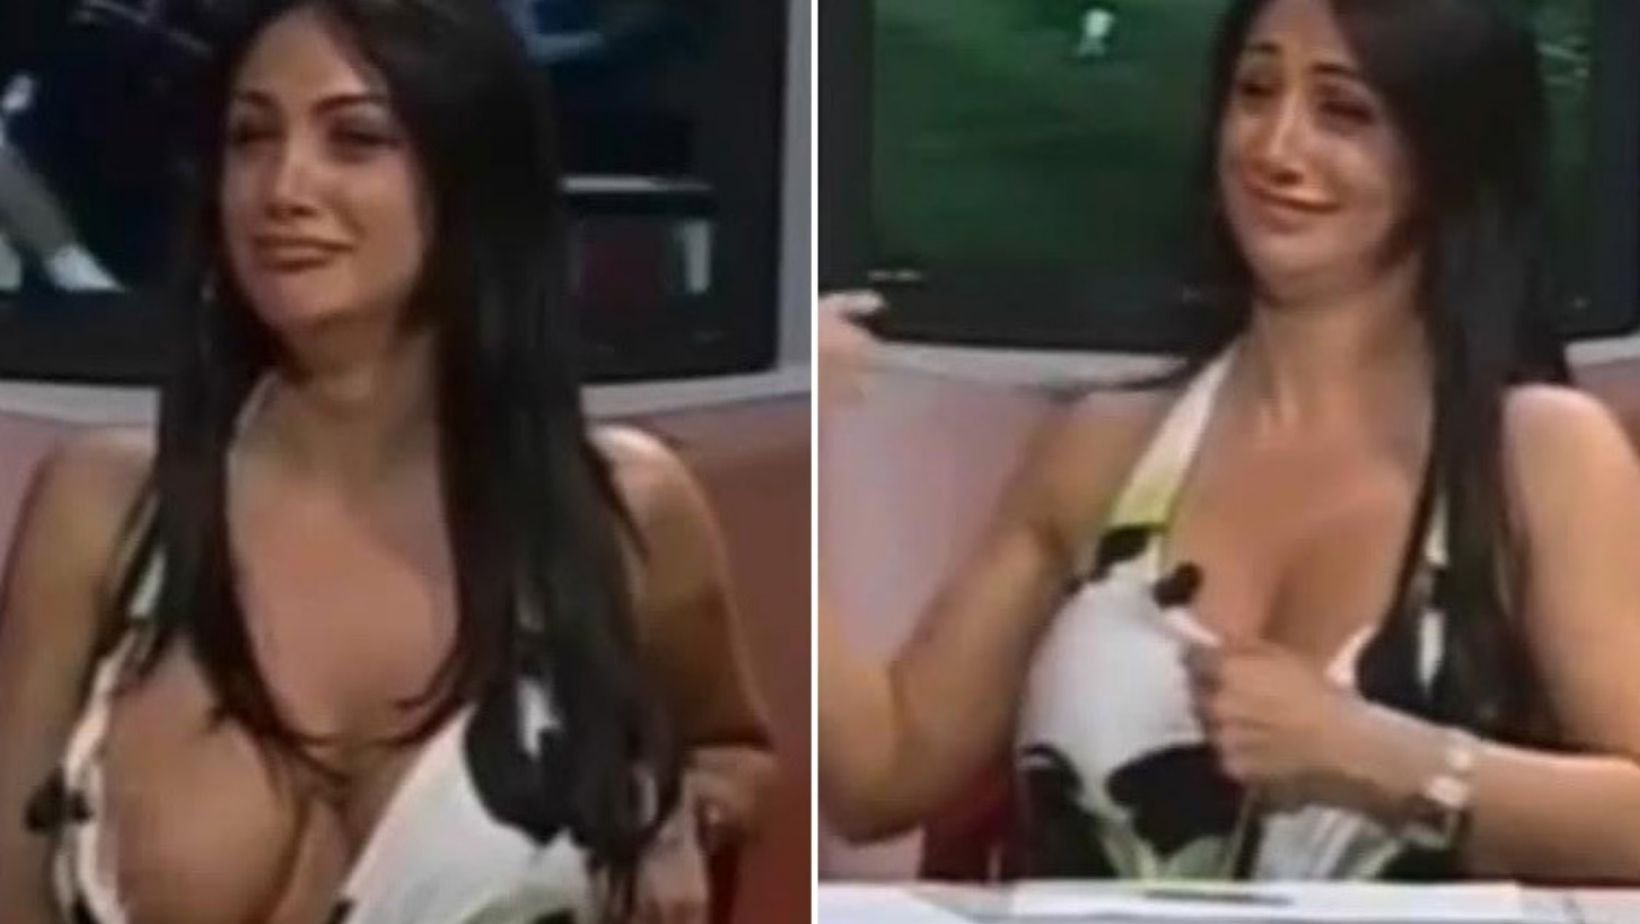 In Italy, a news anchor suffered a huge wardrobe malfunction when she accid...